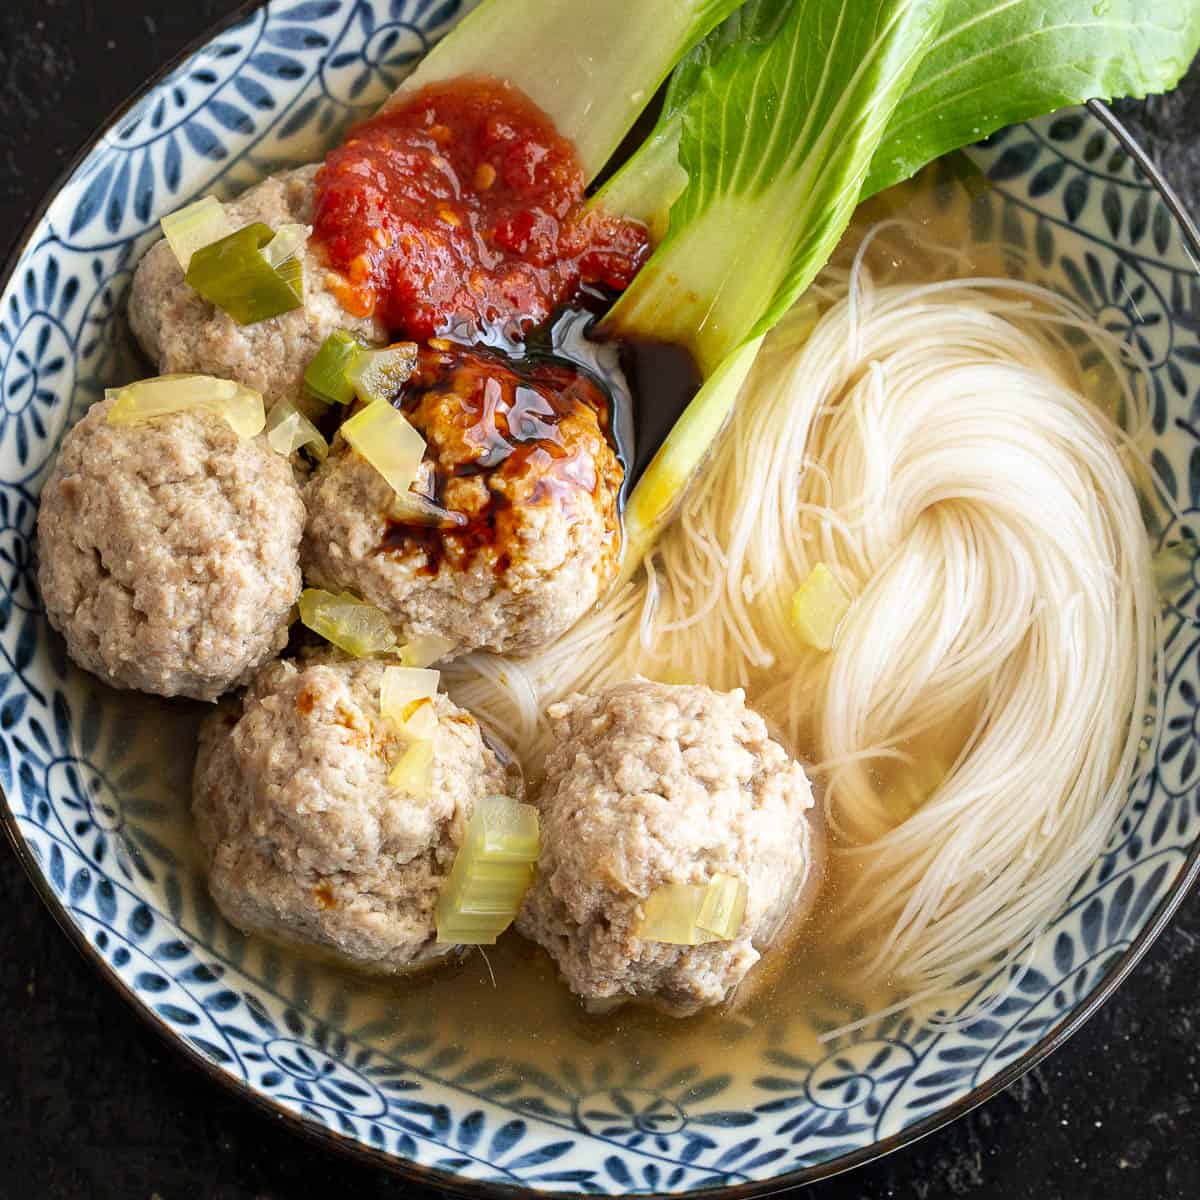 Beef meatballs in a soup broth with noodles and bok choy.